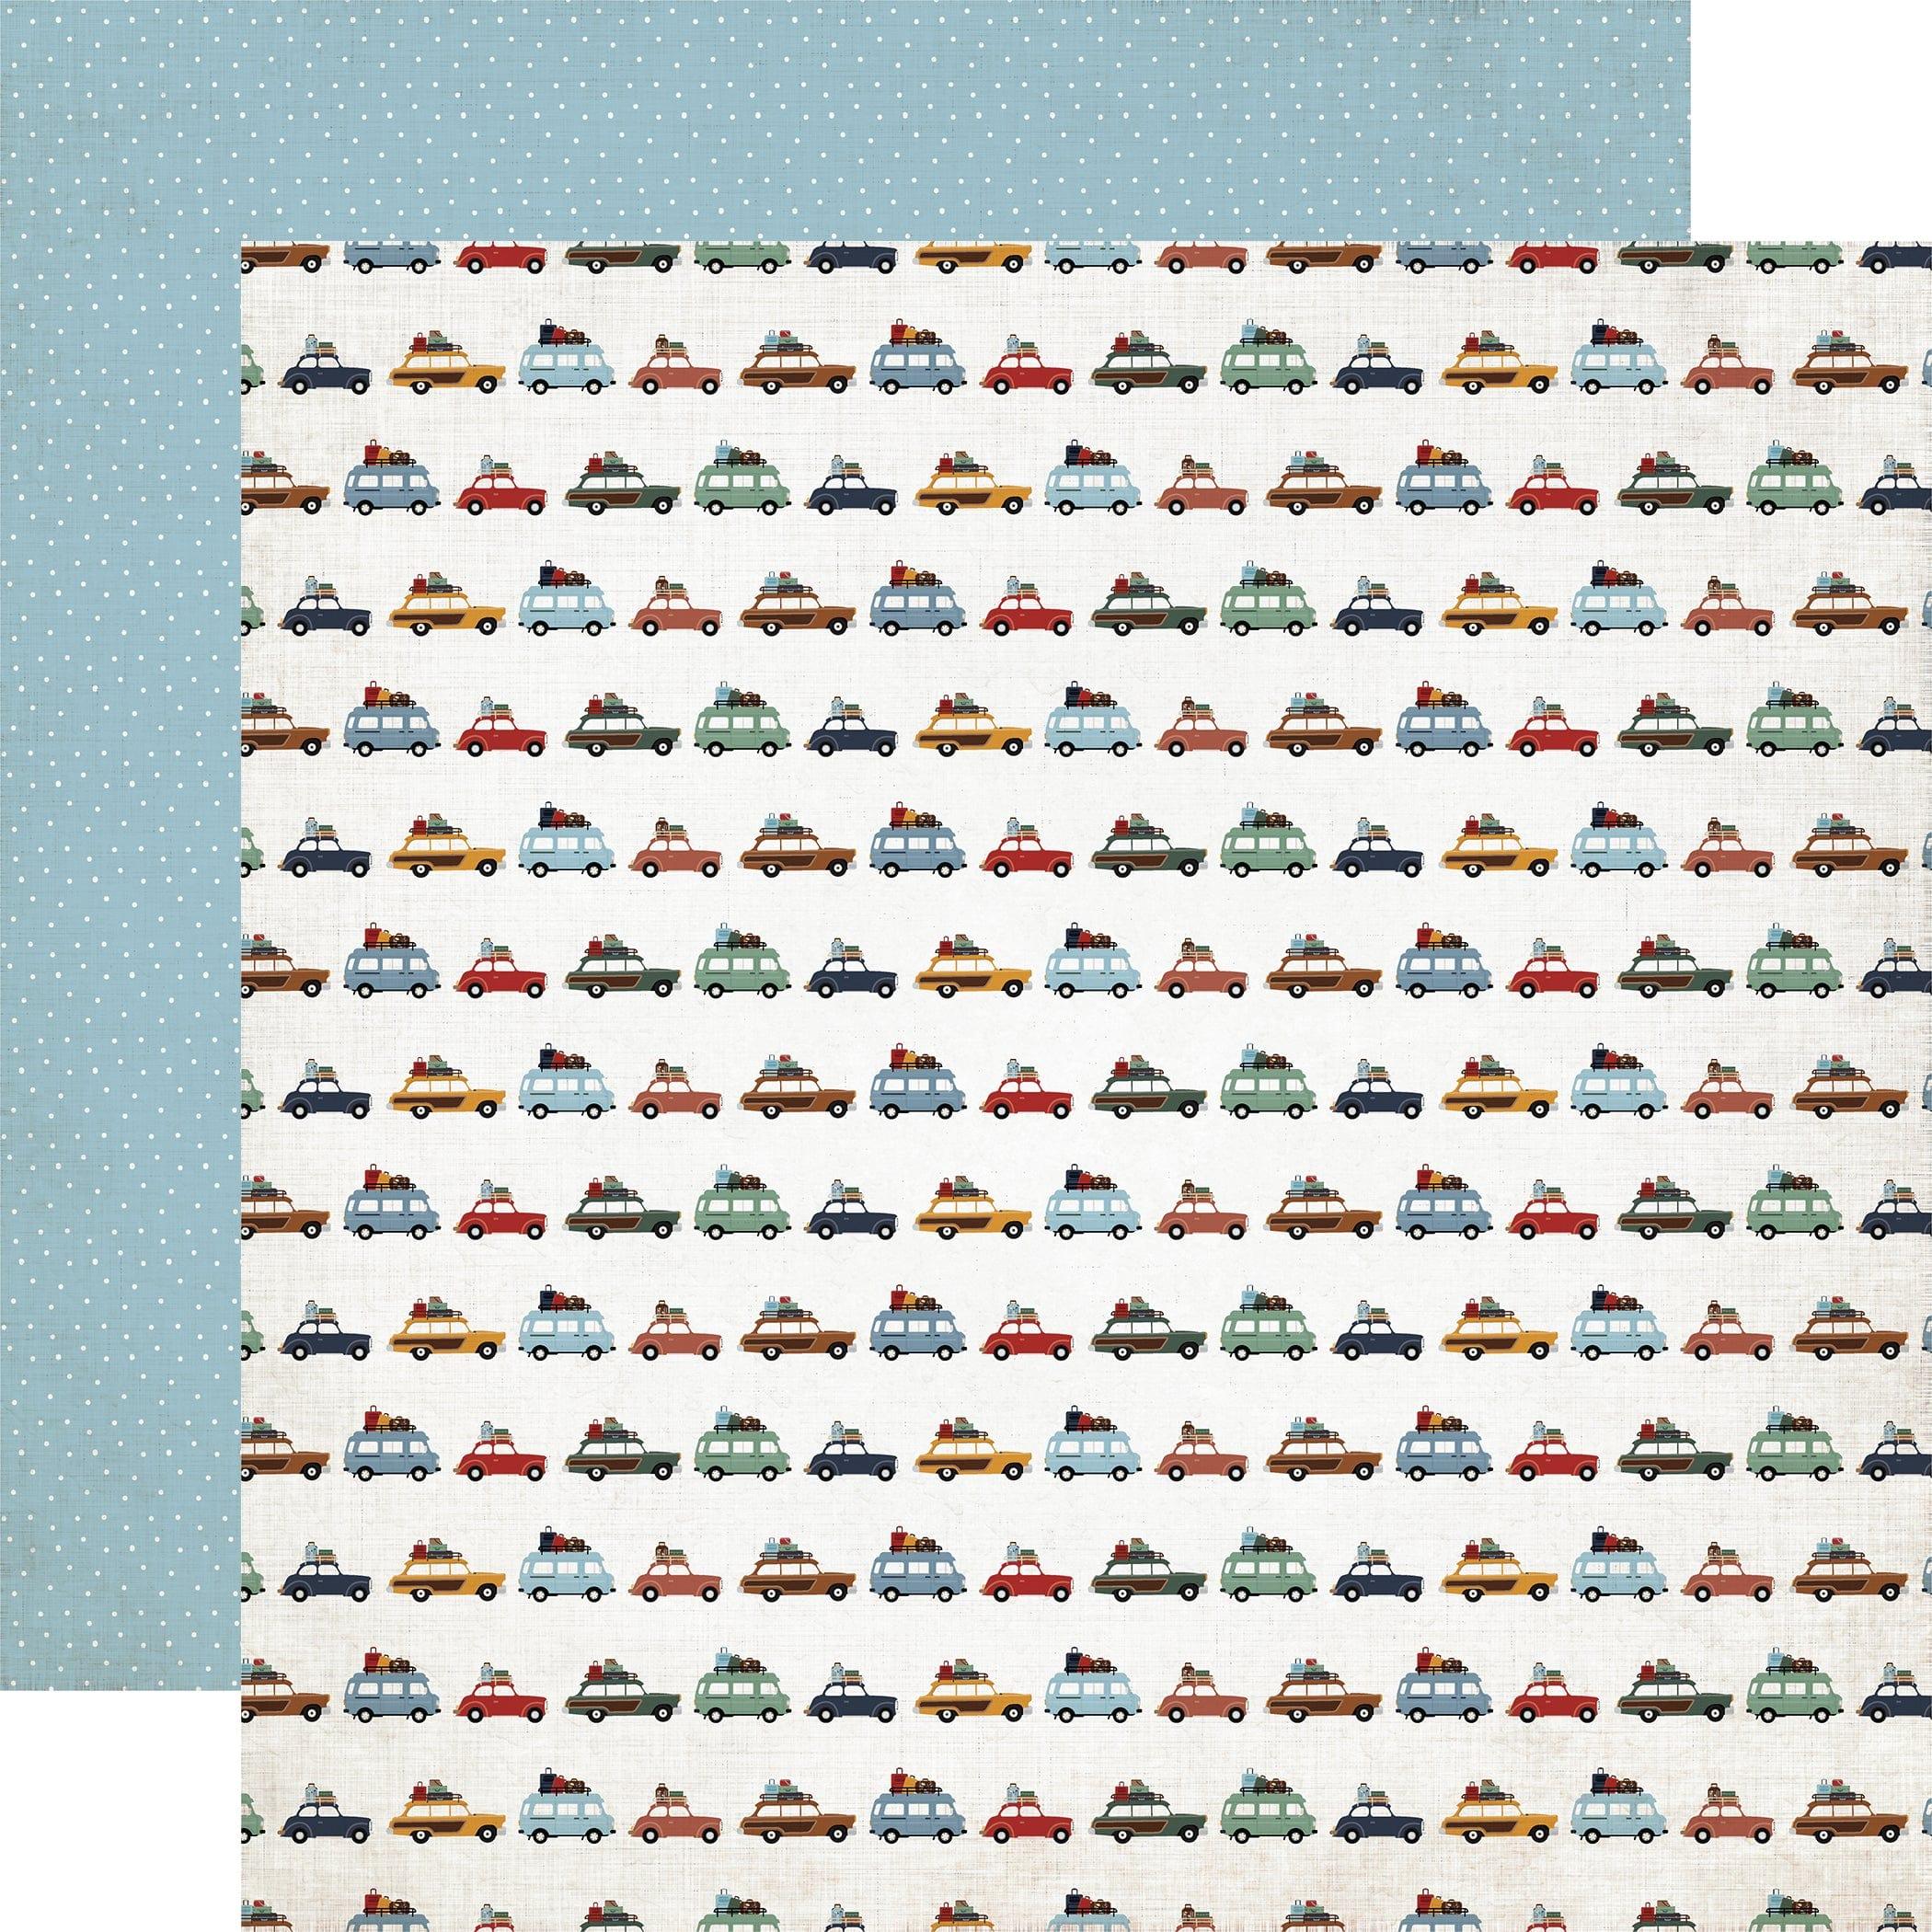 Let's Go Travel Collection On Our Way 12 x 12 Double-Sided Scrapbook Paper by Echo Park Paper